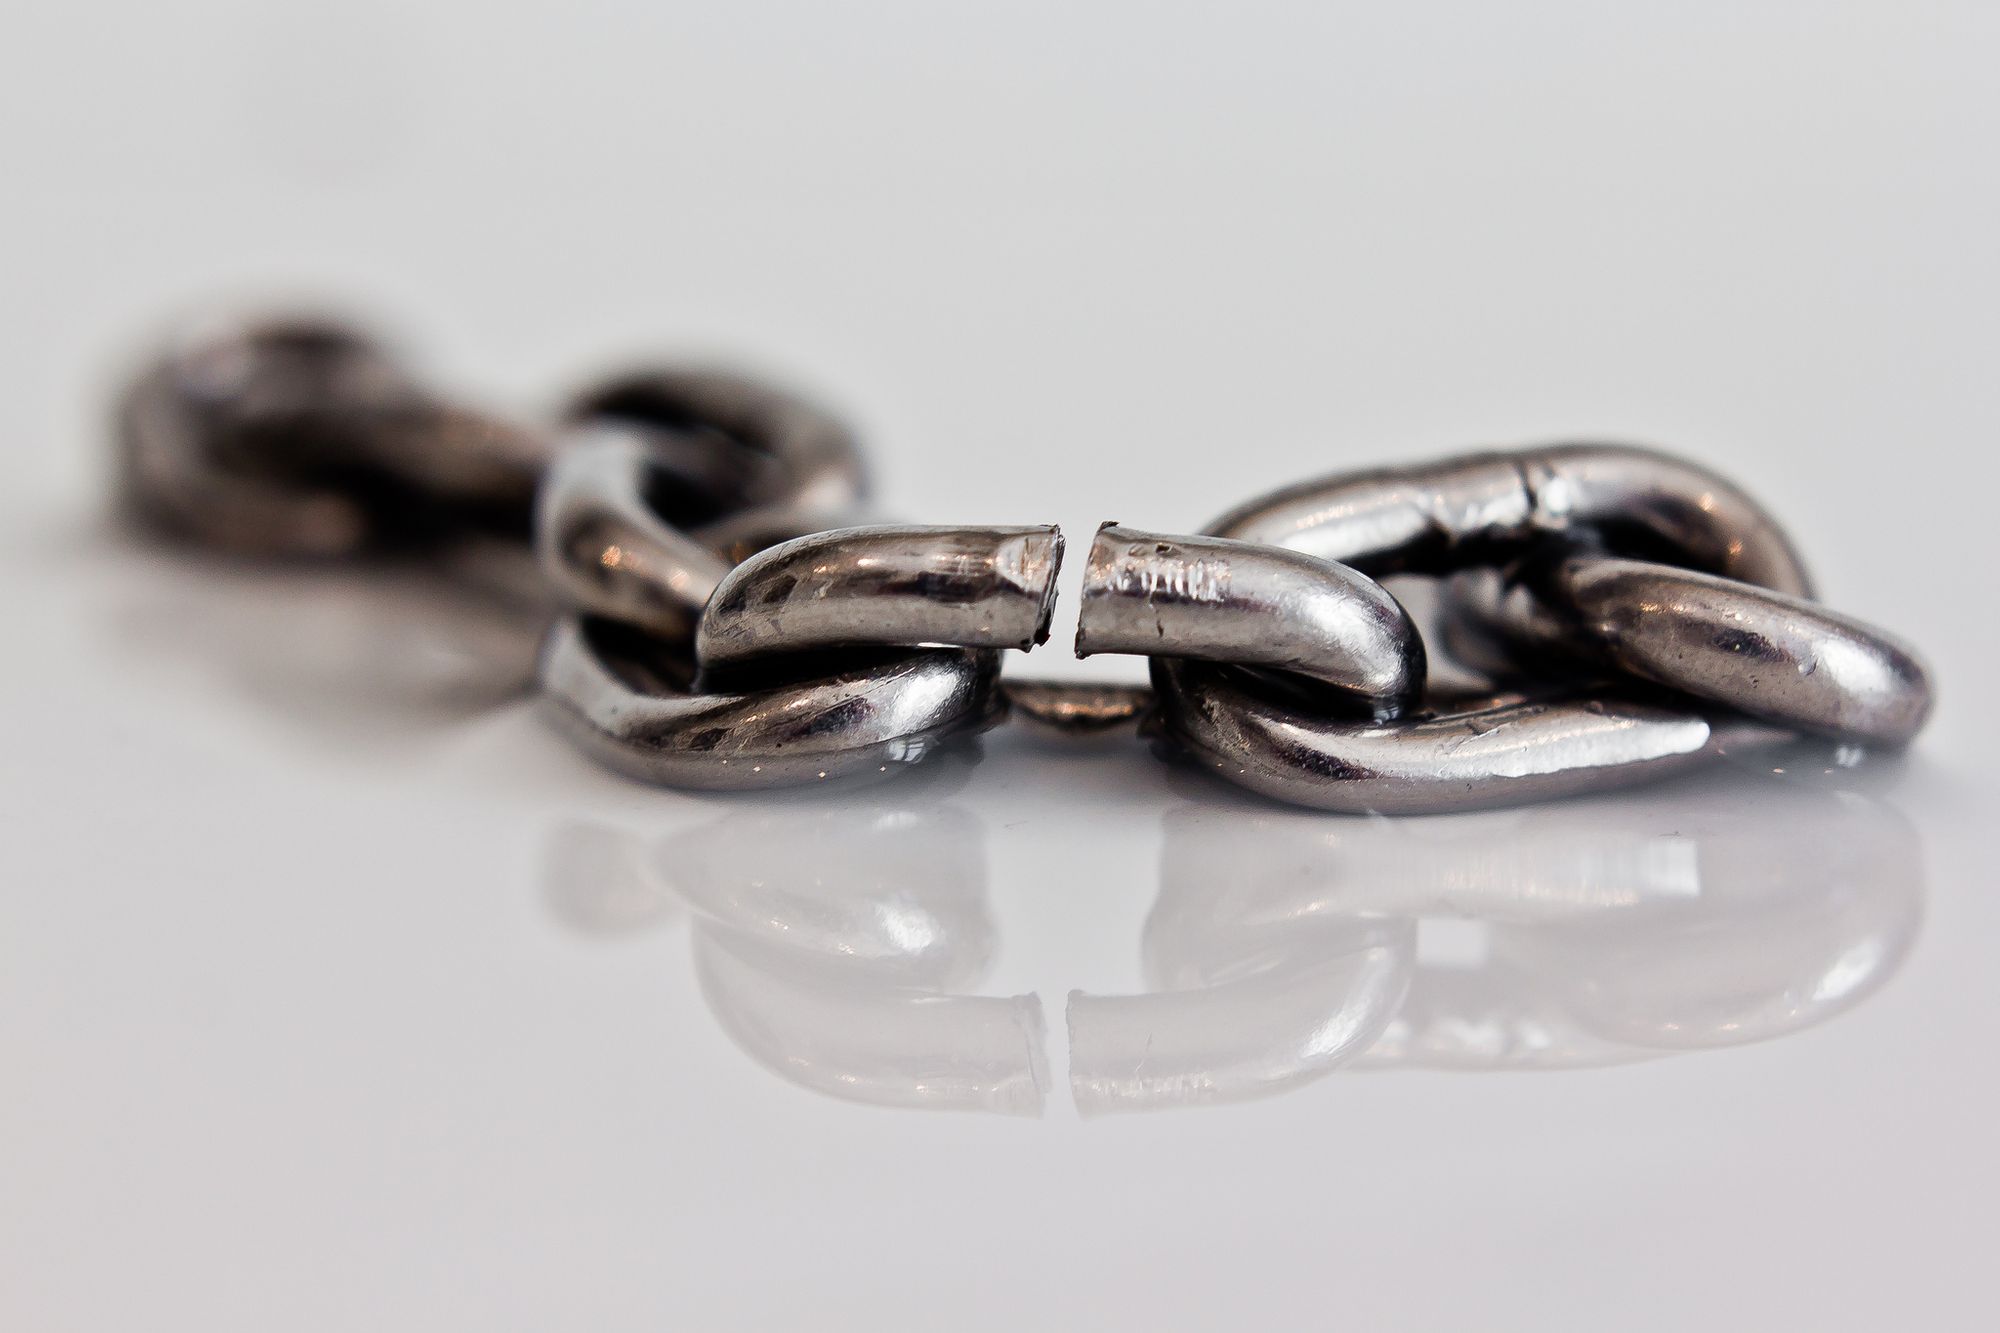 Don't break the chain: use RxJava's compose() operator